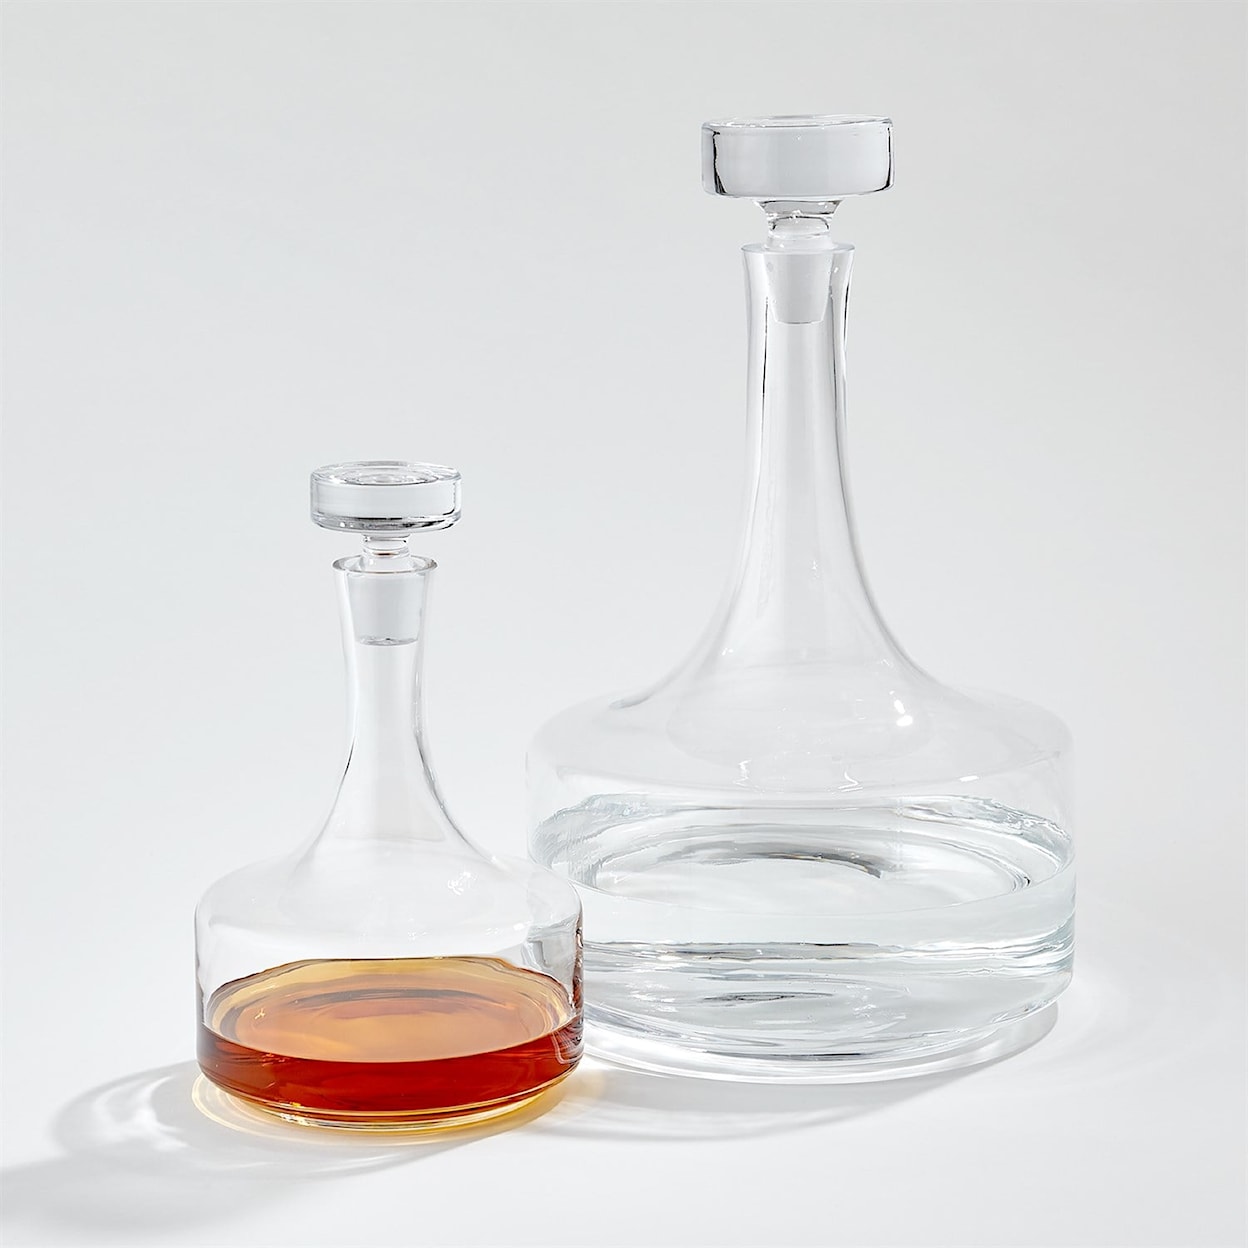 Global Views Accents Piston Decanter-Sm